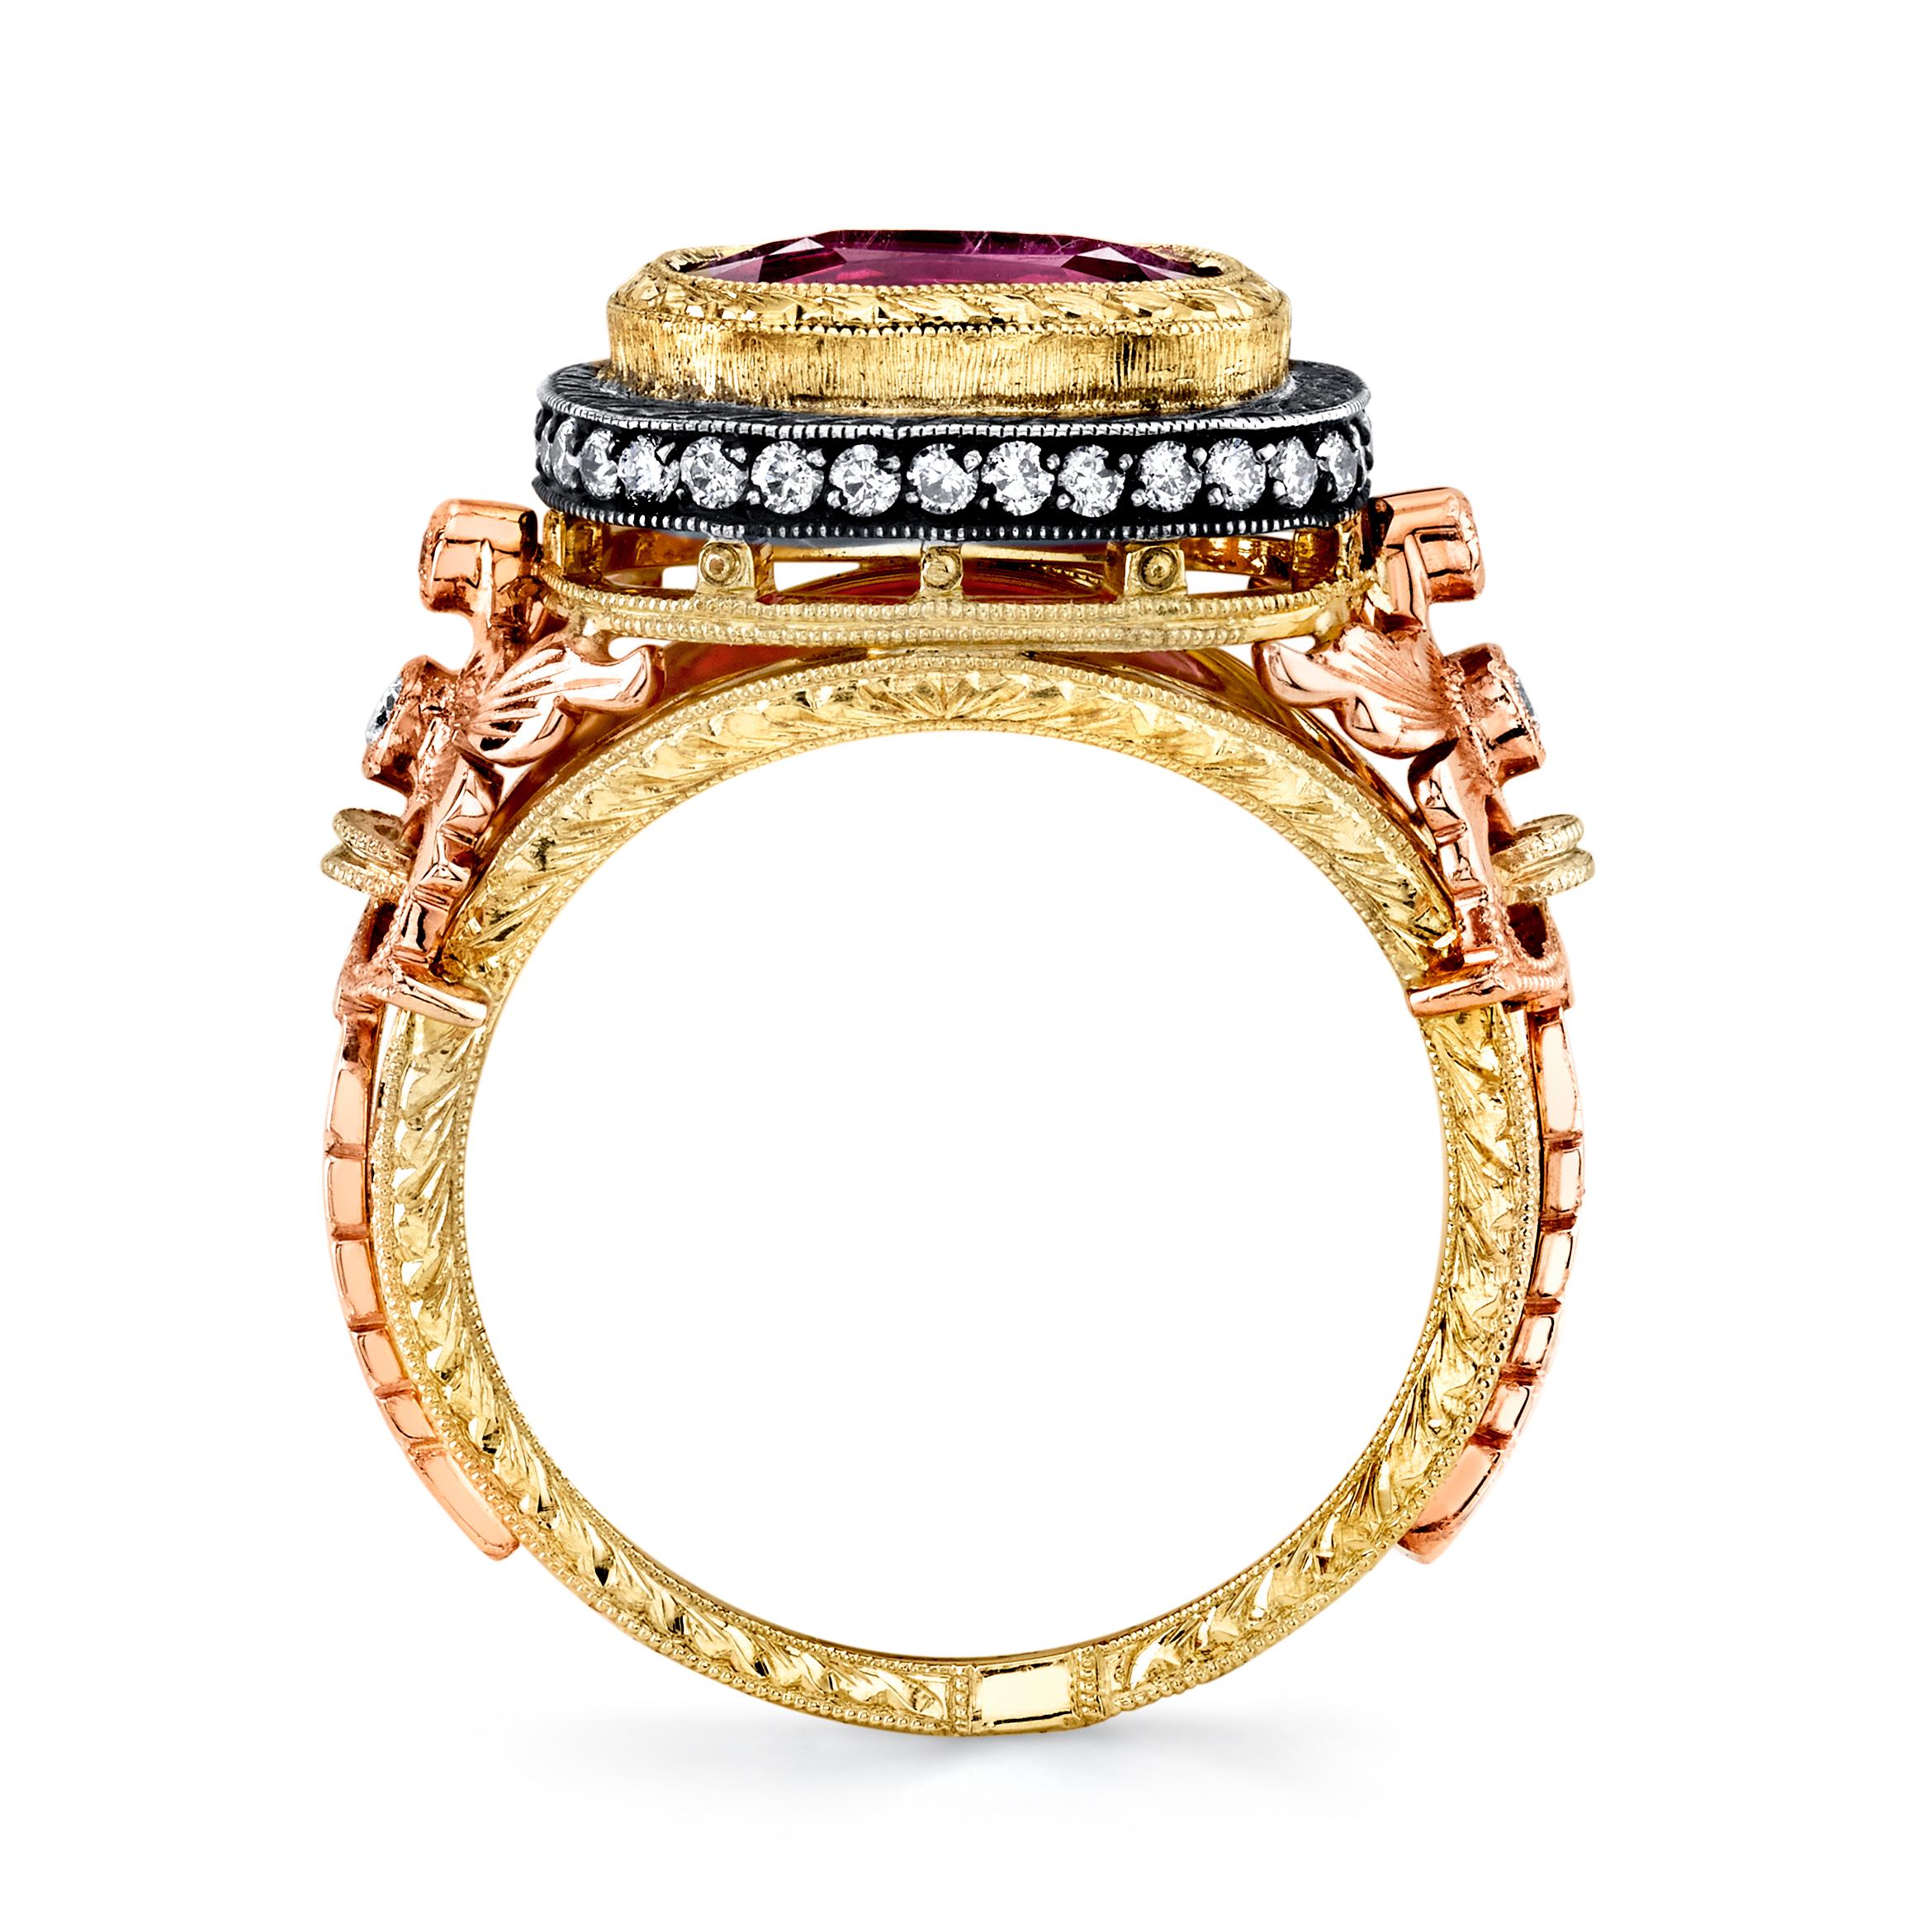 This beautifully handmade ring features a vibrant, hot pink sapphire cushion weighing 3.29 carats. The sapphire has rich, saturated color and is extremely brilliant with excellent clarity. It has been set in an engraved 18k yellow gold bezel and